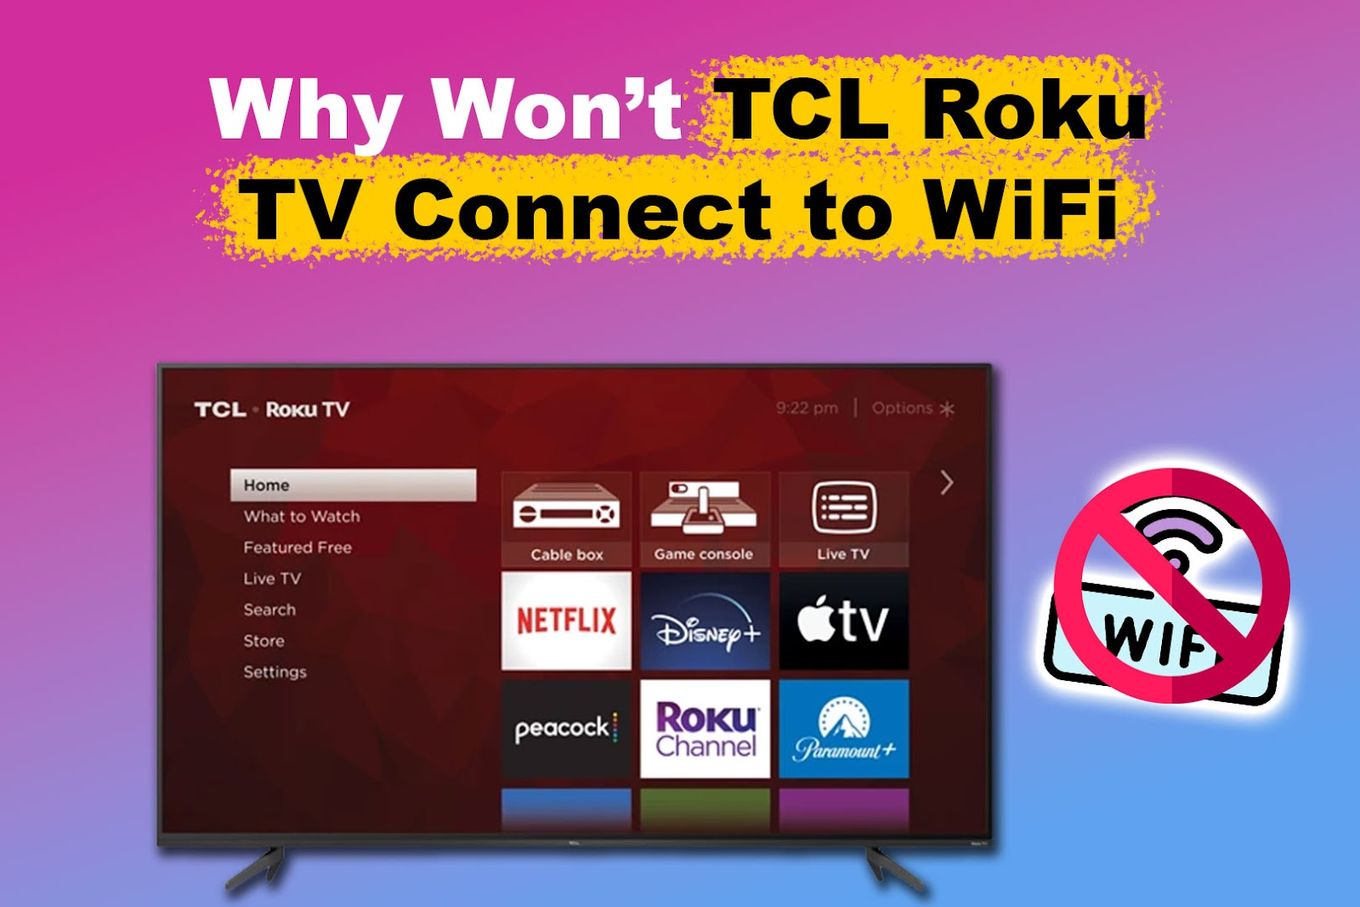 Why Won’t TCL Roku TV Connect to WiFi